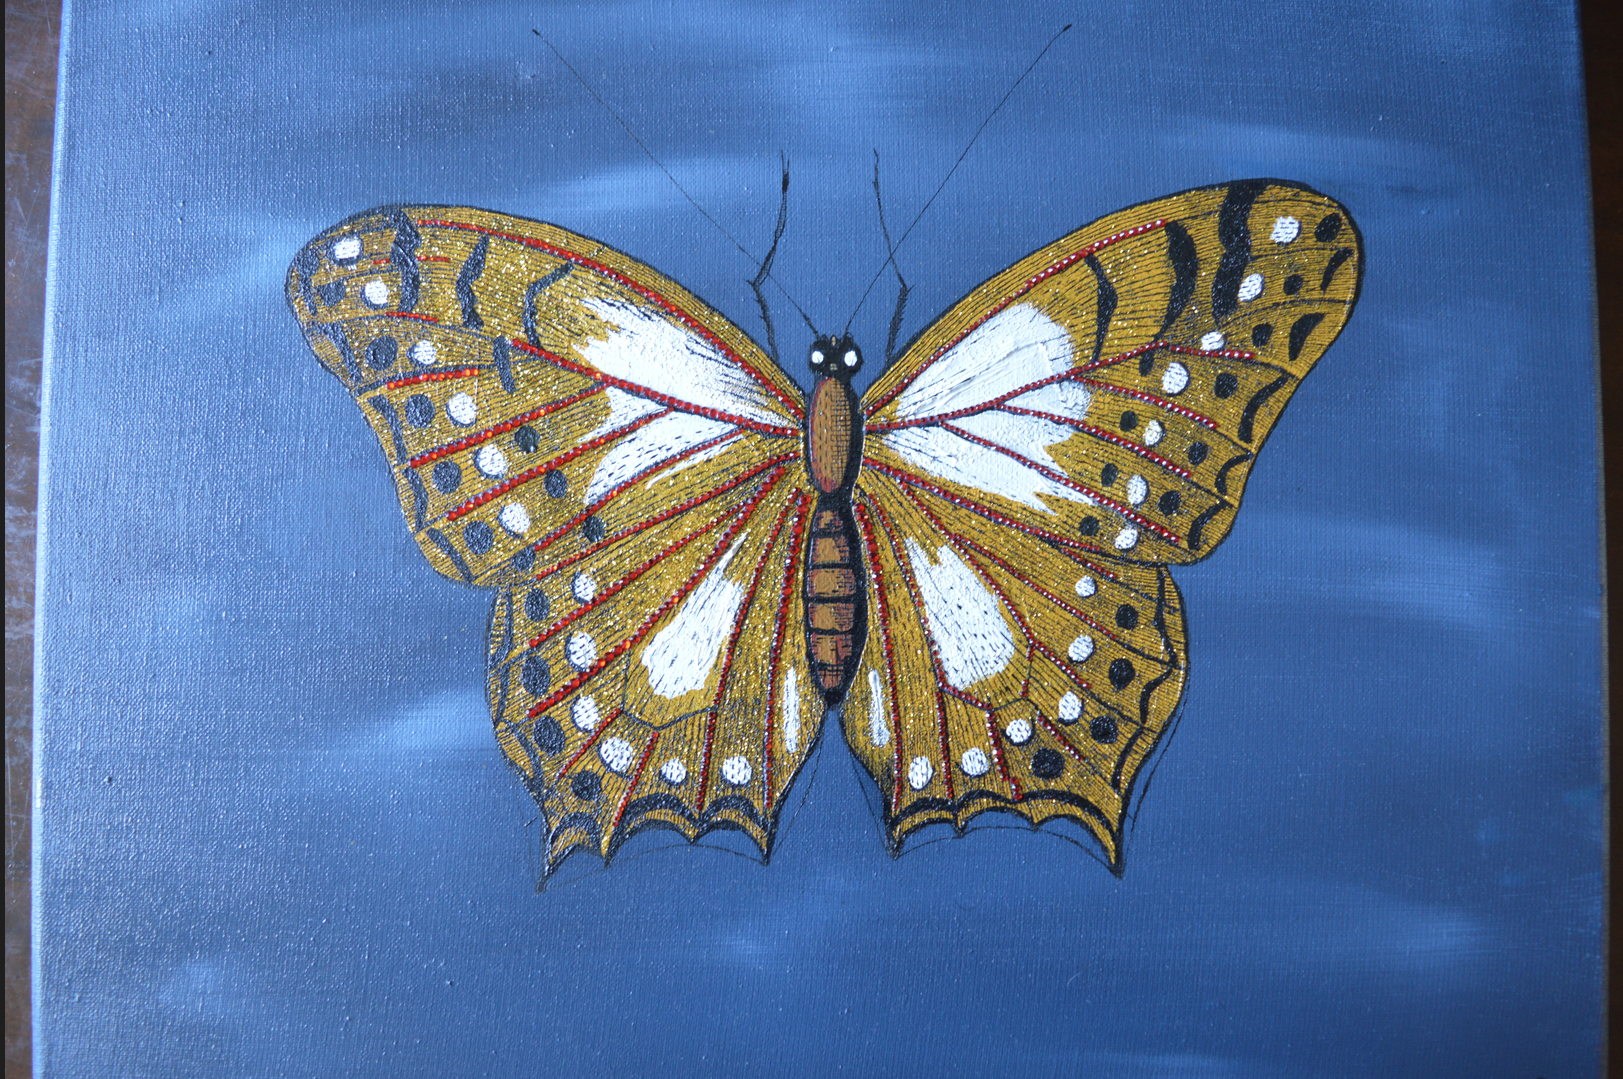 Butterfly. Wings made out of oilpaint and glitter to give an extra spark. 24x30cm